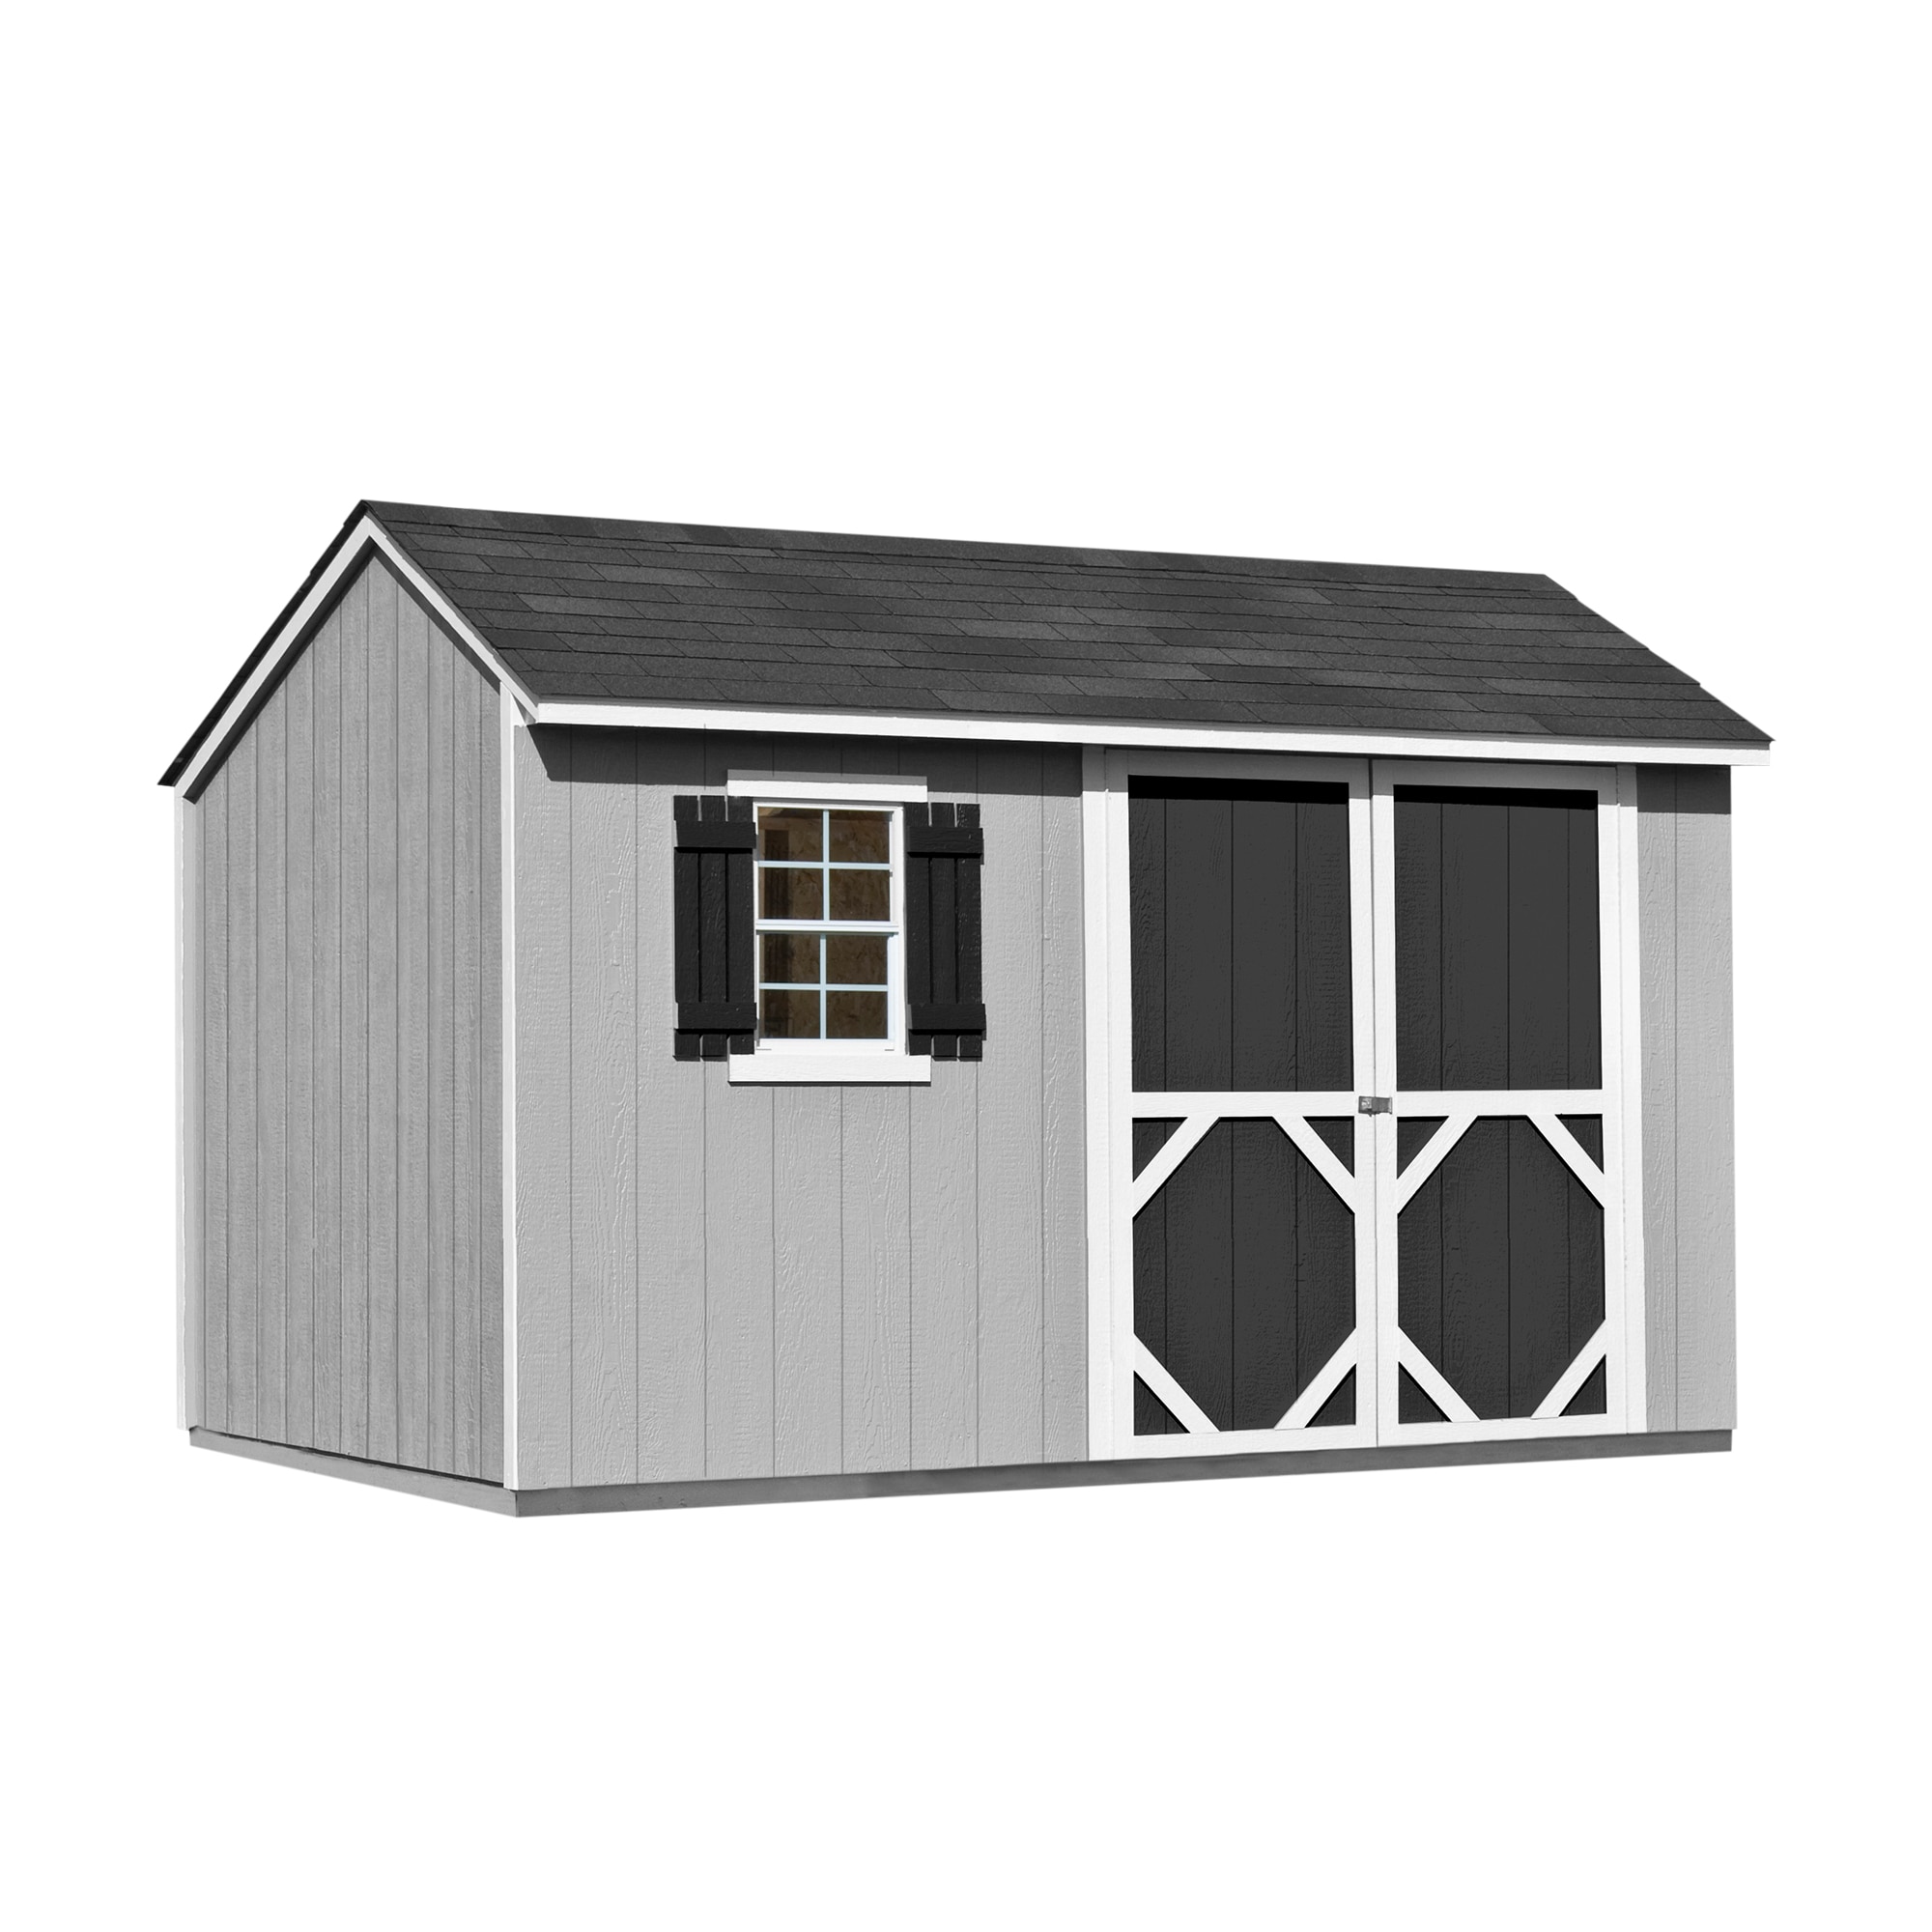 Sheds For Sale Near Me